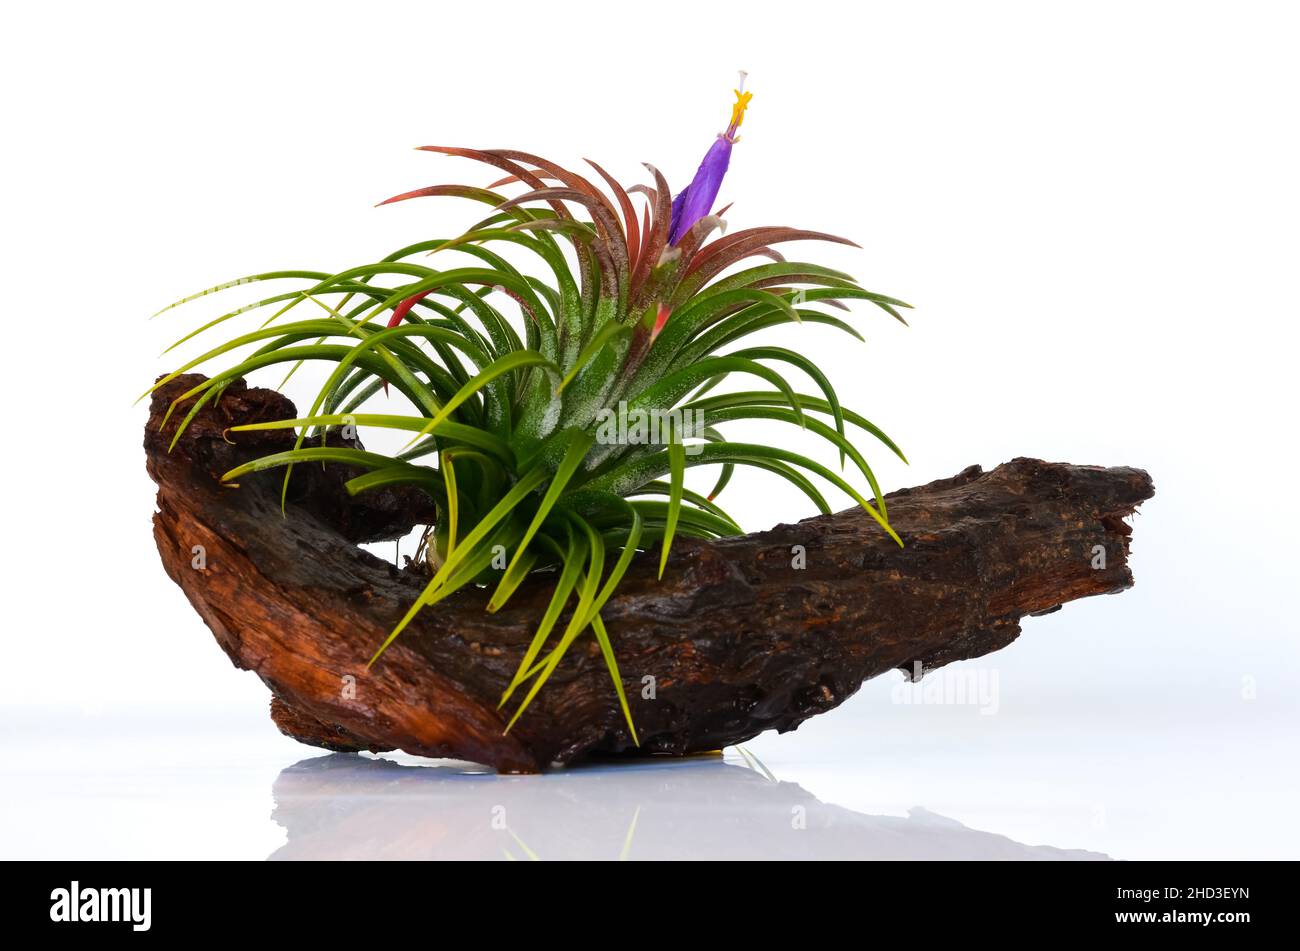 Blooming air plant - Tillandsia with colorful flowers plant in wooden log on white background. Stock Photo